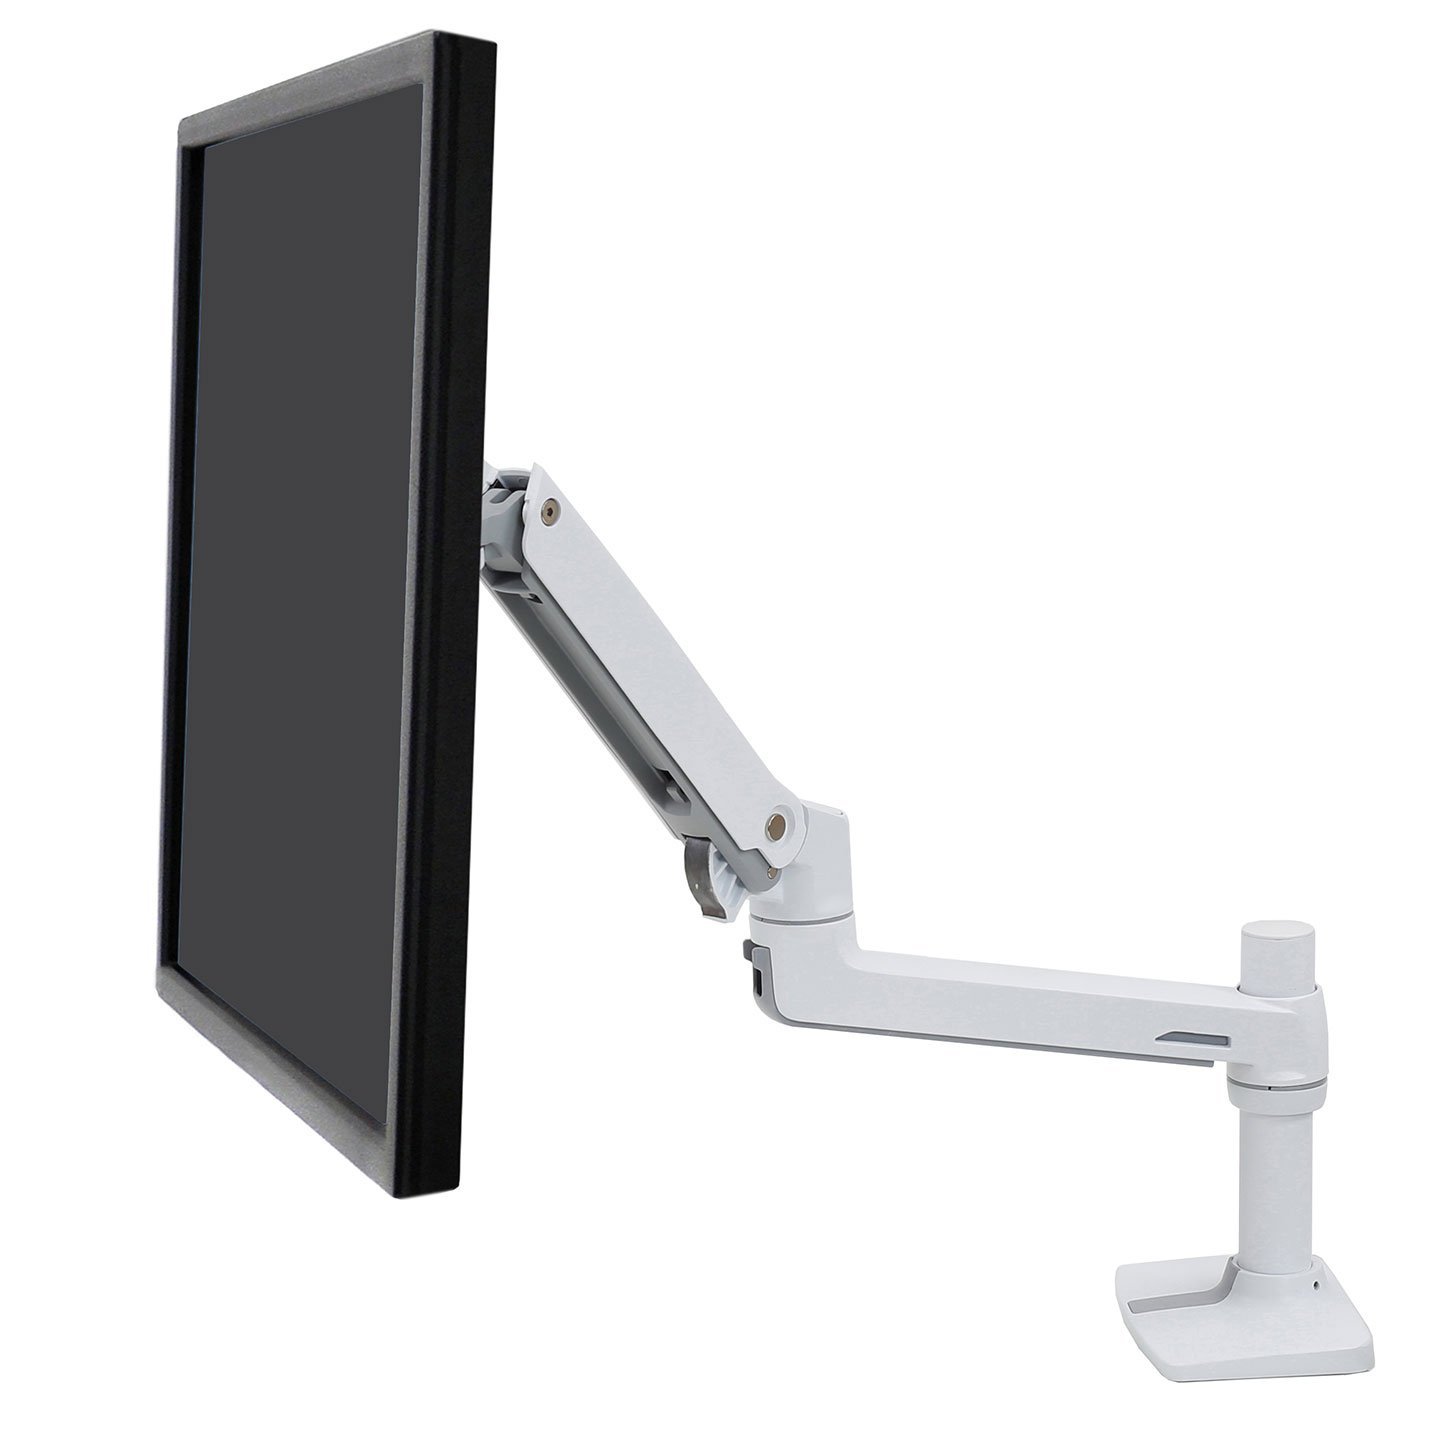 Haworth Monitor Arm Accessories with full motion and steel in white 